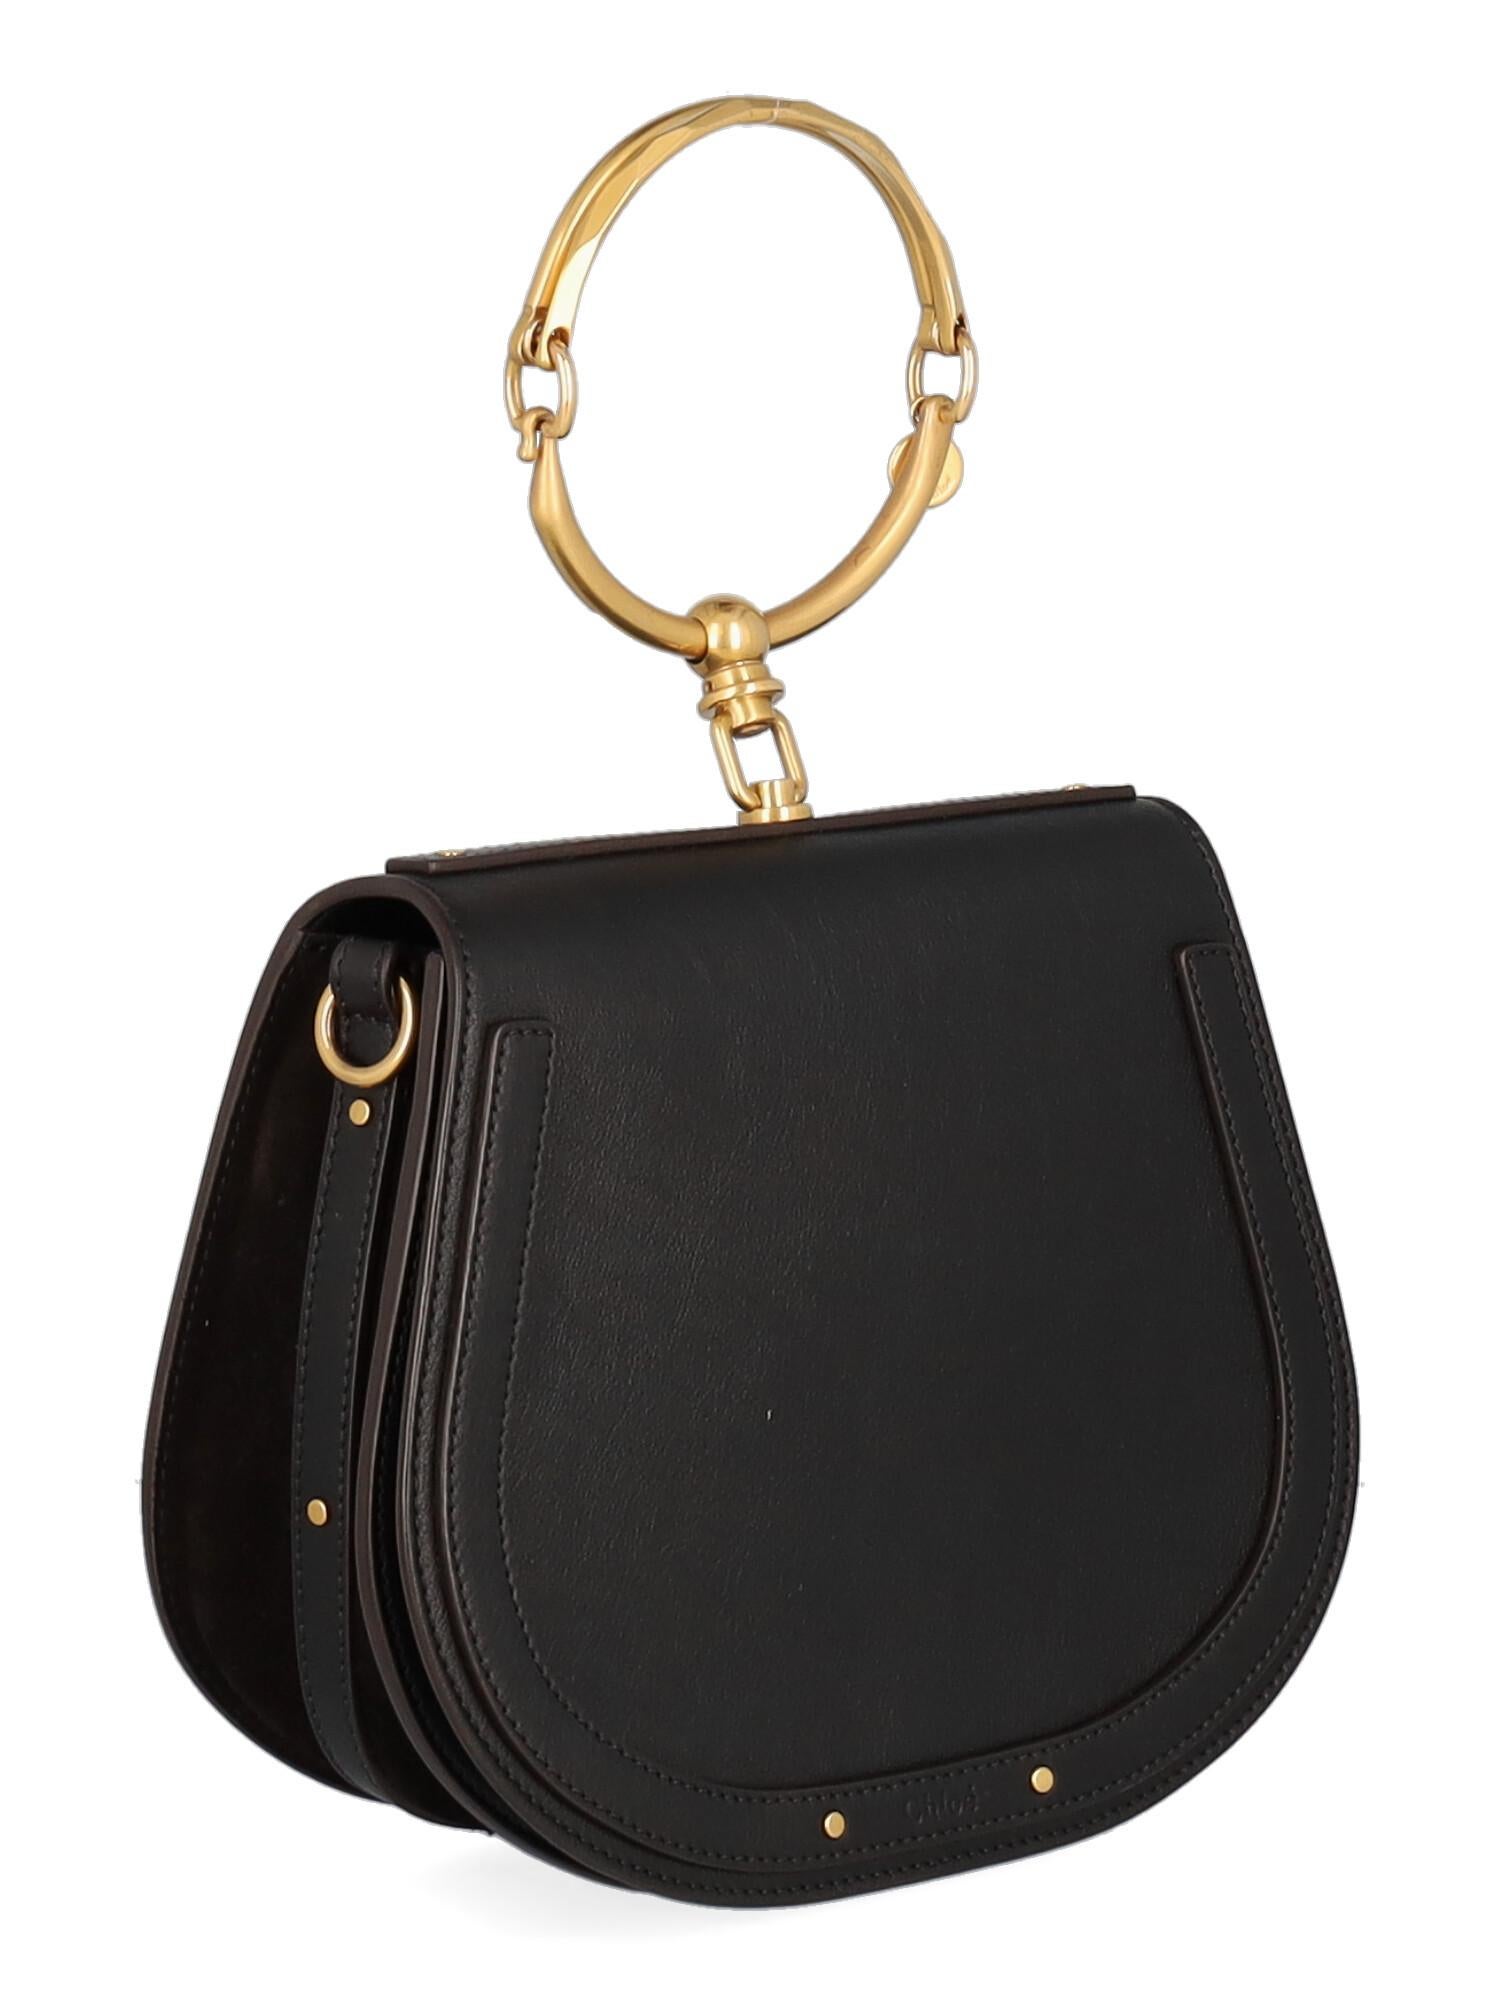 Chloé Women Shoulder bags Nile Black Leather  In Good Condition For Sale In Milan, IT